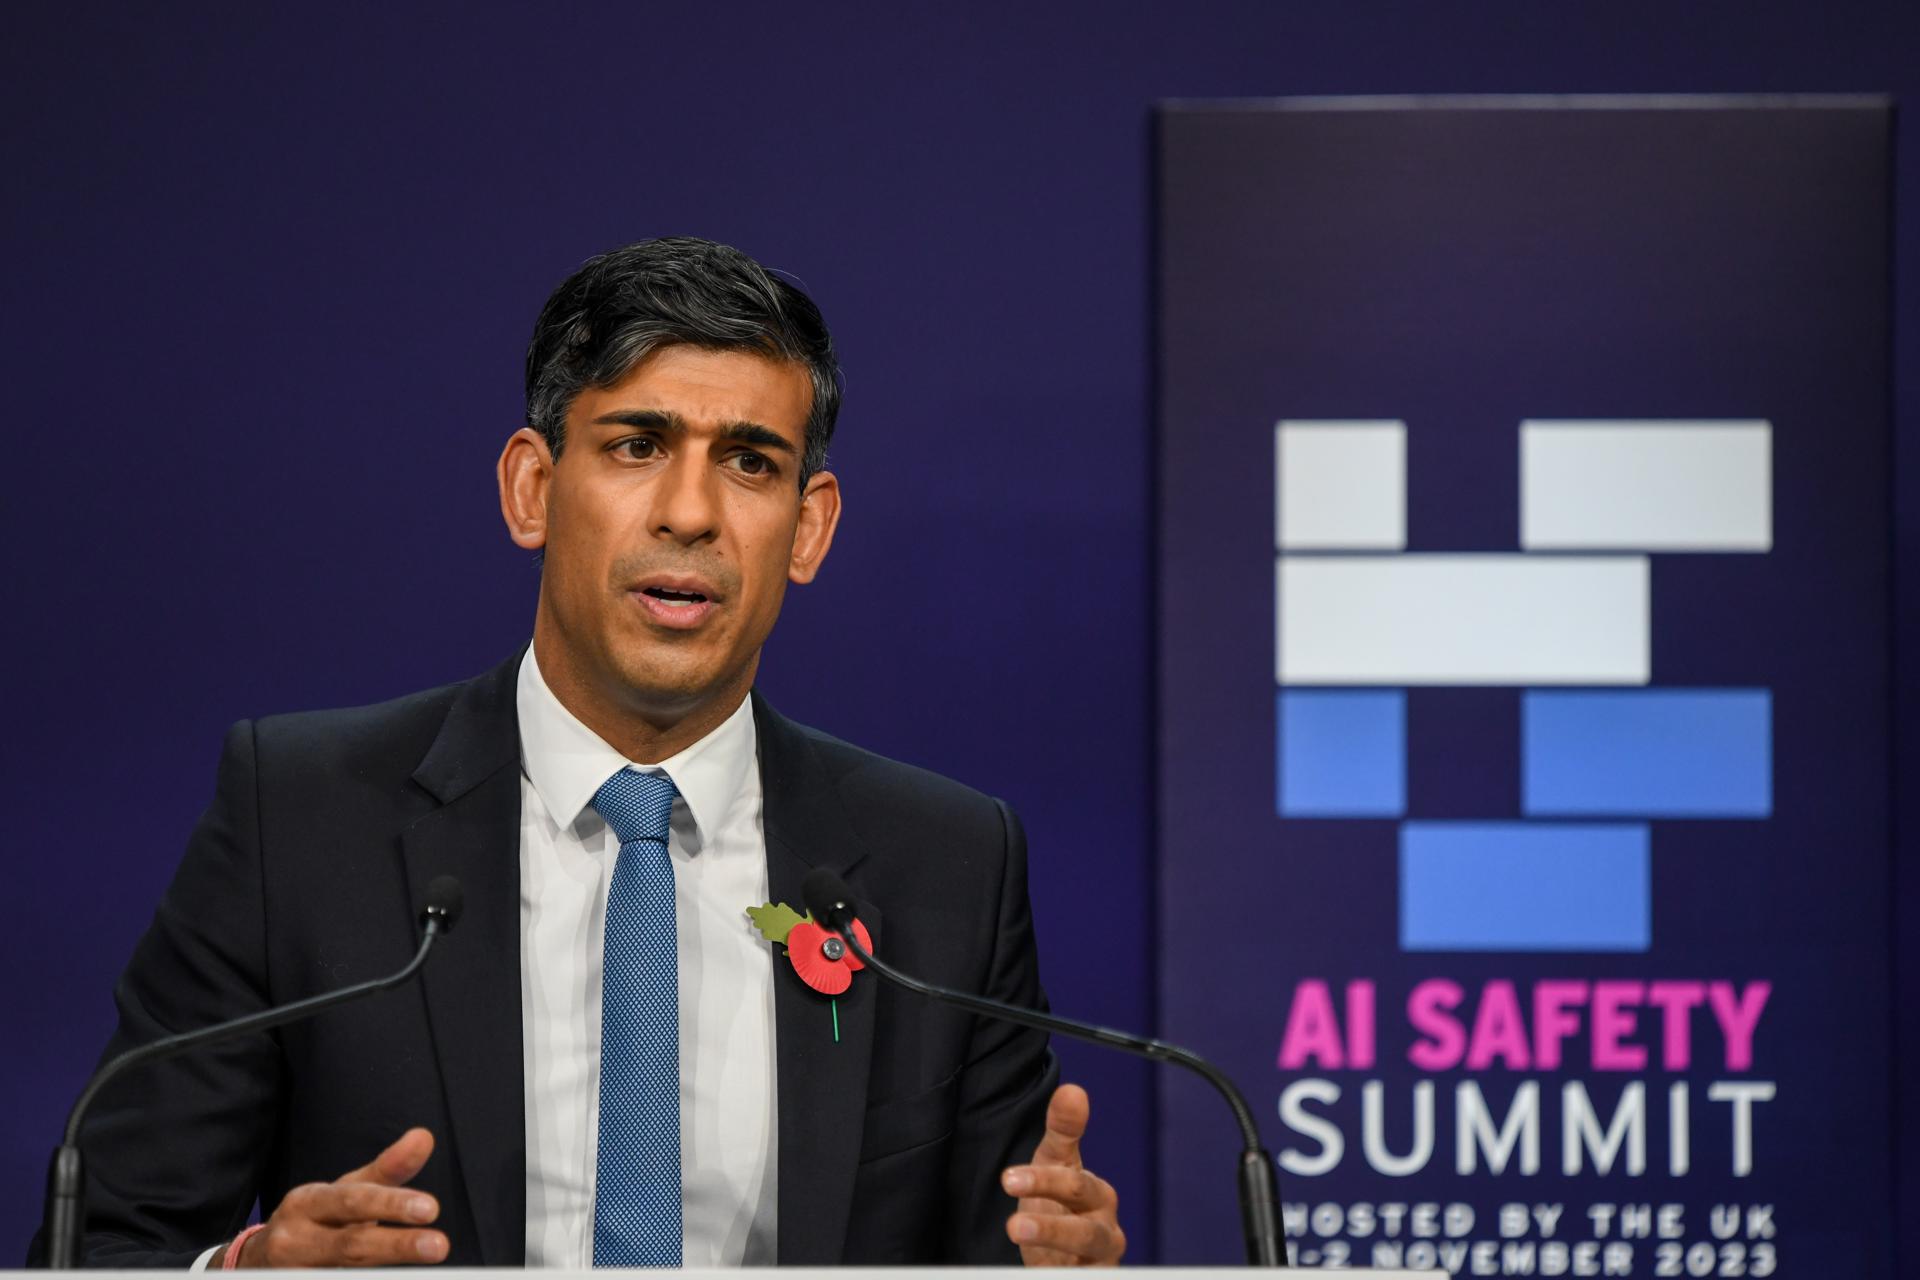 British Prime Minister Rishi Sunak speaks during a news conference on day two of the AI Safety Summit 2023 at Bletchley Park, Milton Keynes, Britain, 02 November 2023. (Reino Unido) EFE/EPA/CHRIS J. RATCLIFFE / POOL